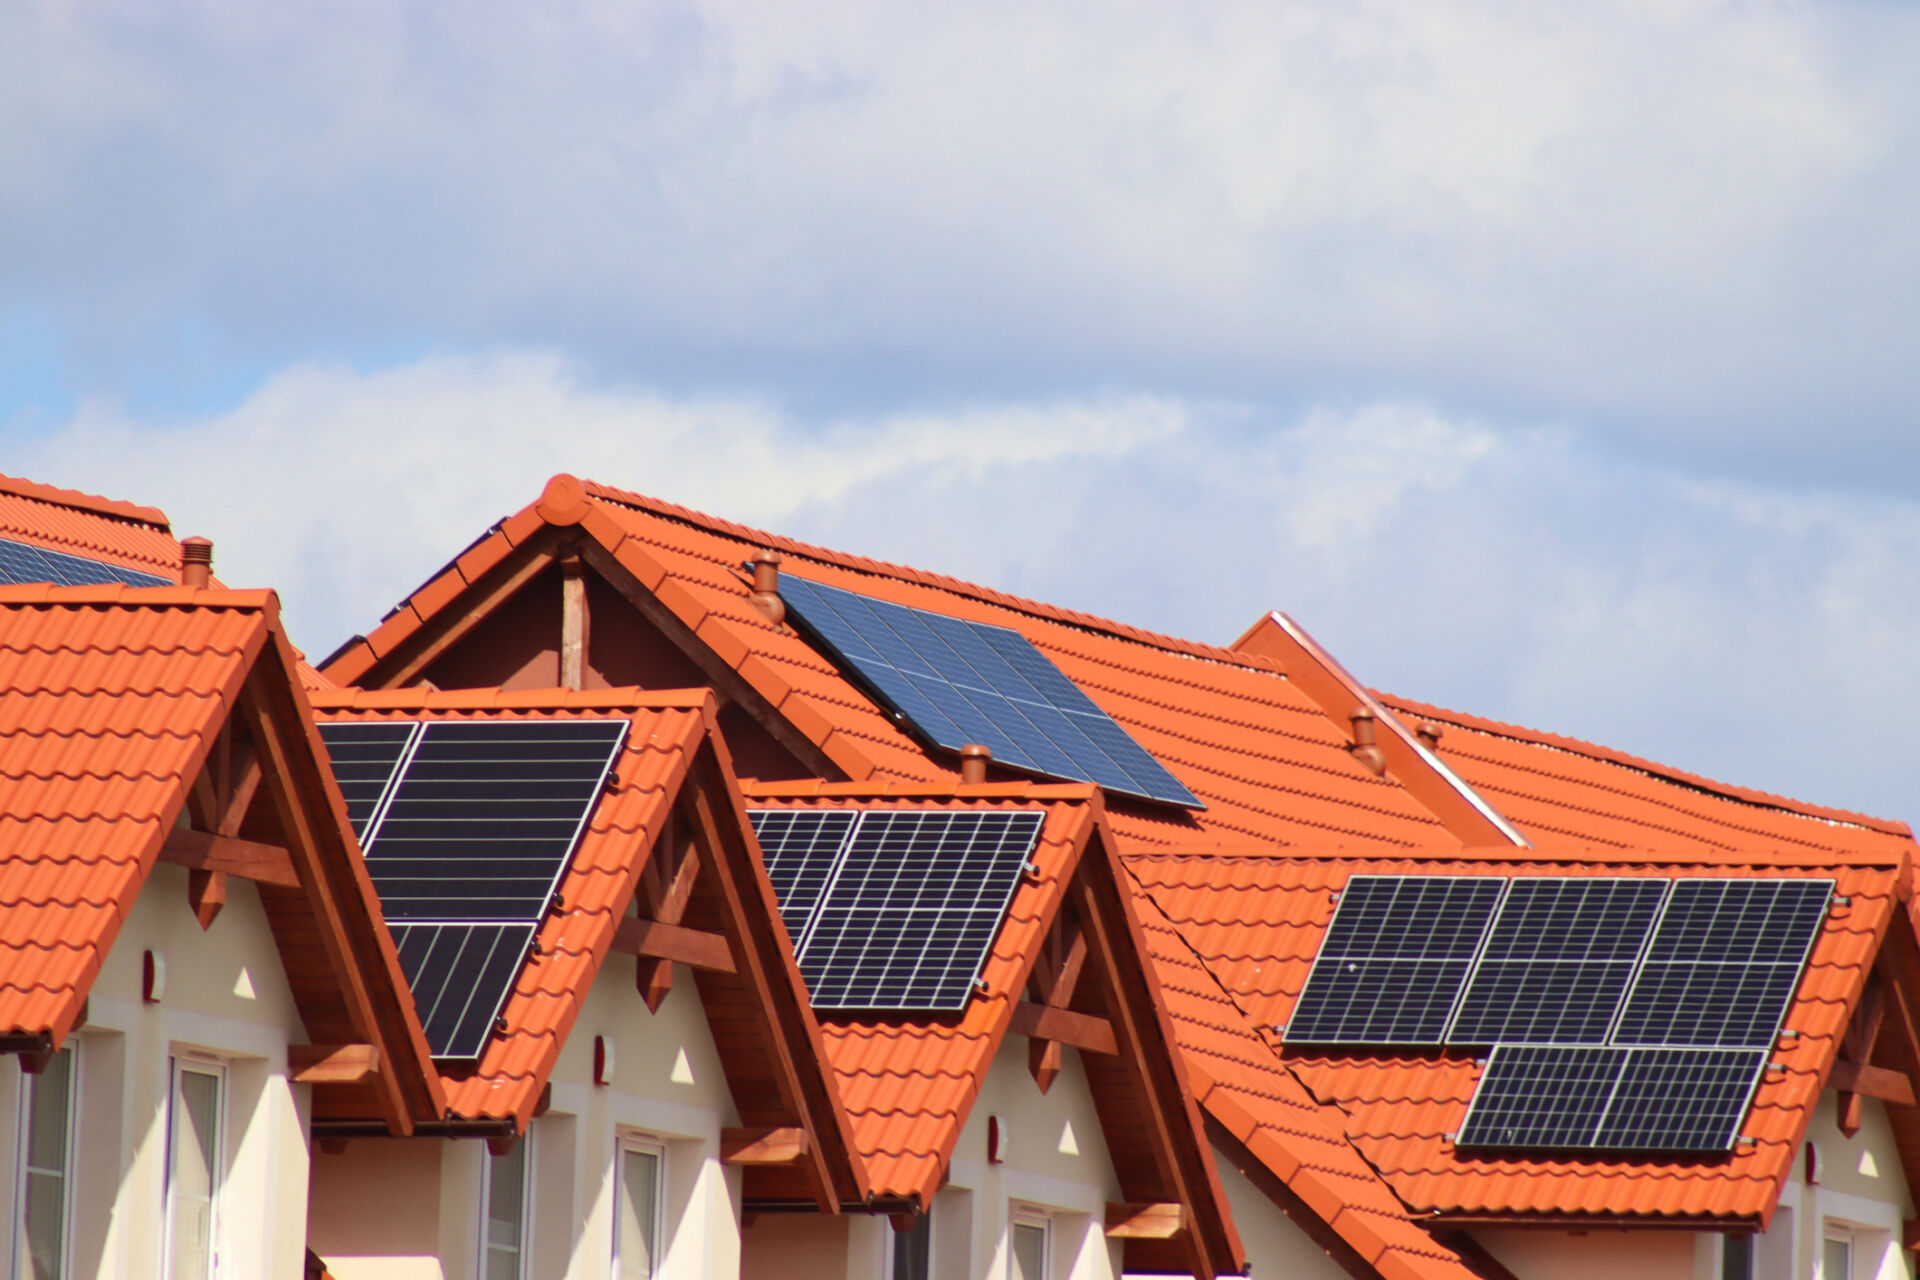 Photovoltaics, photovoltaic panels placed on the tile roof on terraced houses. Small solar panels